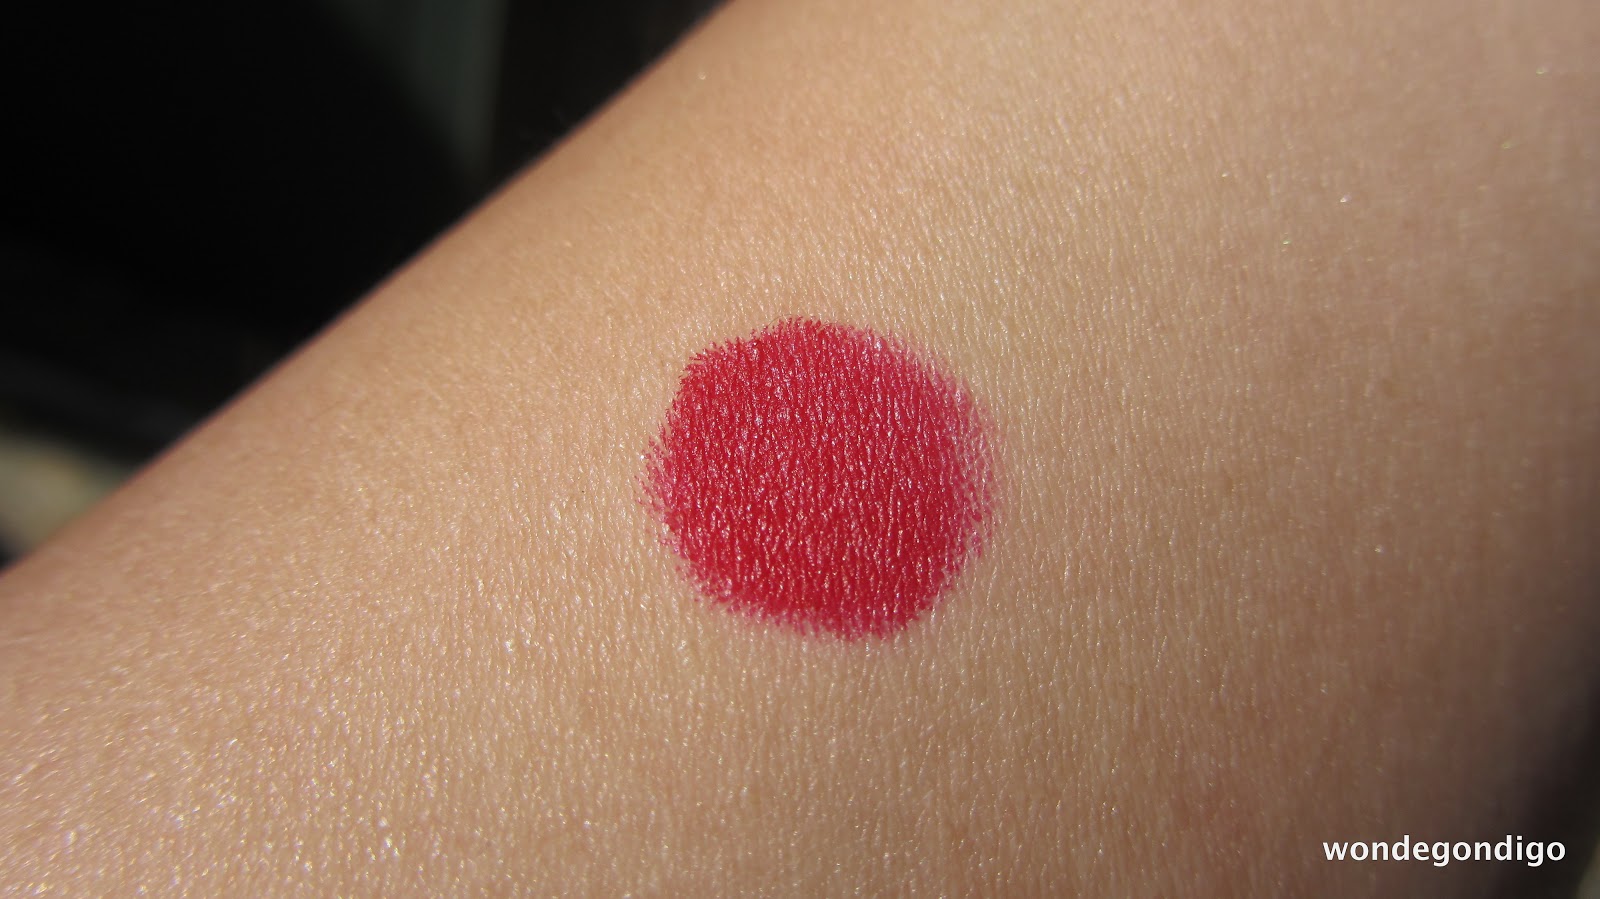 Perfect Red Circle On Skin Pictures to Pin on Pinterest 